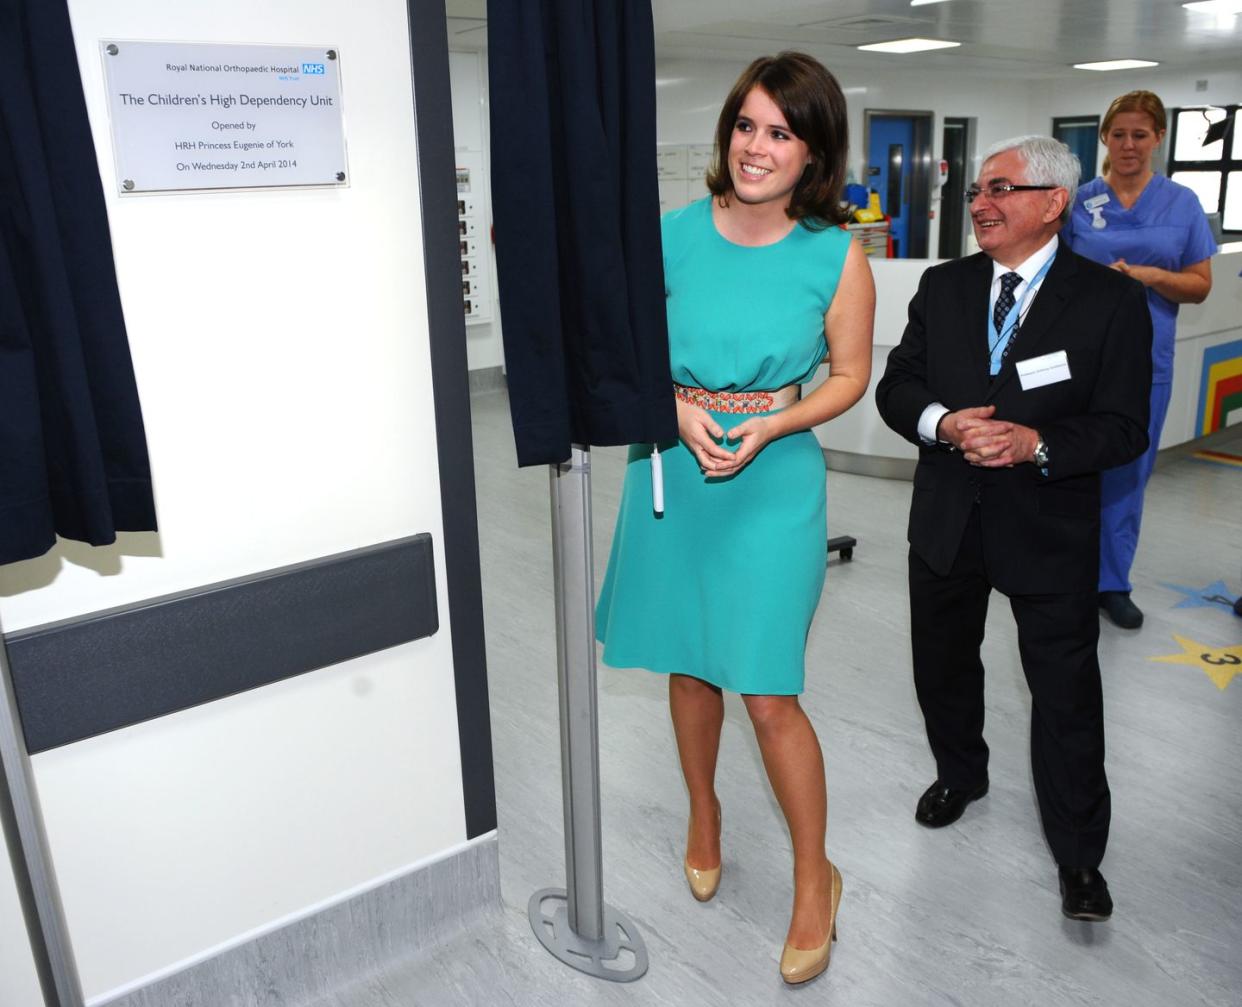 Princess Eugenie opens the new Children's High Dependency Unit at the Royal National Orthopaedic Hospital.